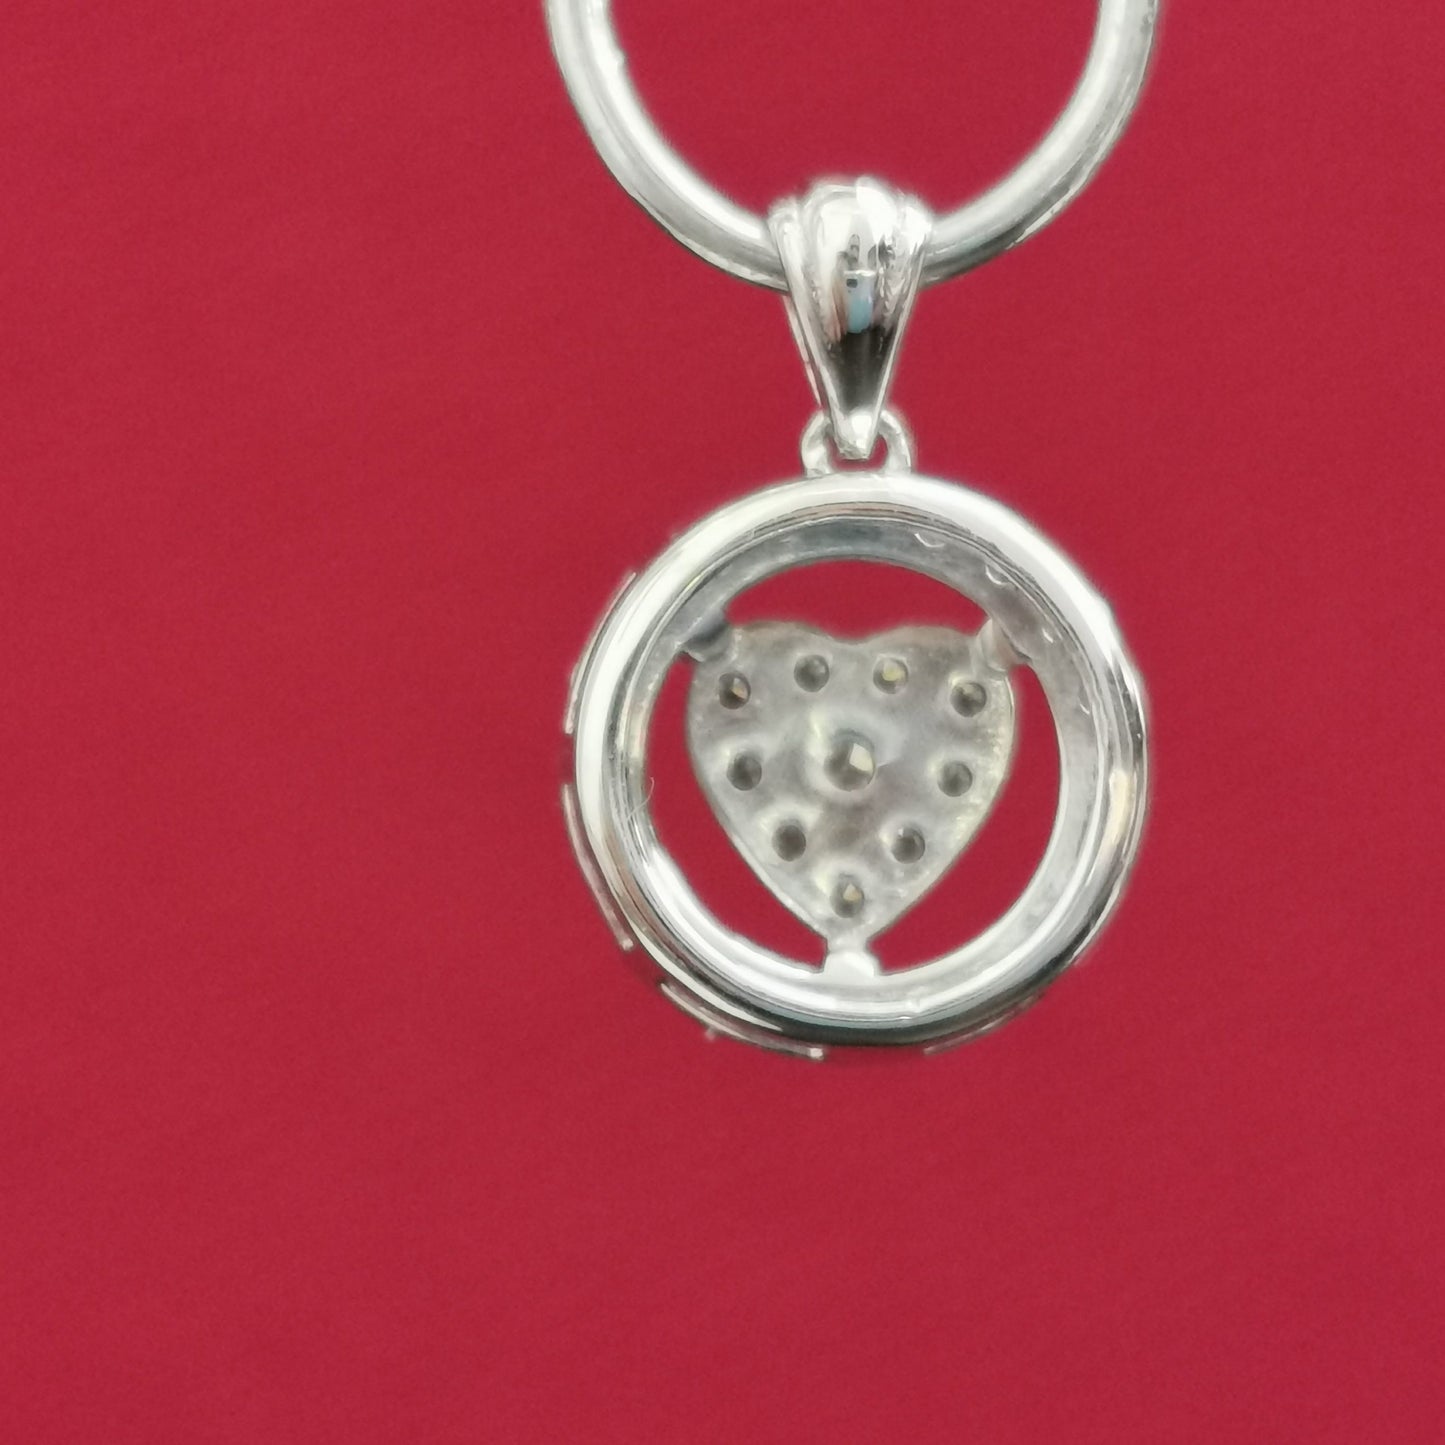 0.45 CT 14K White Gold D VVS2 Diamond Heart Pendant Round Cut Certified For Him For Her Anniversary Beautiful Gift